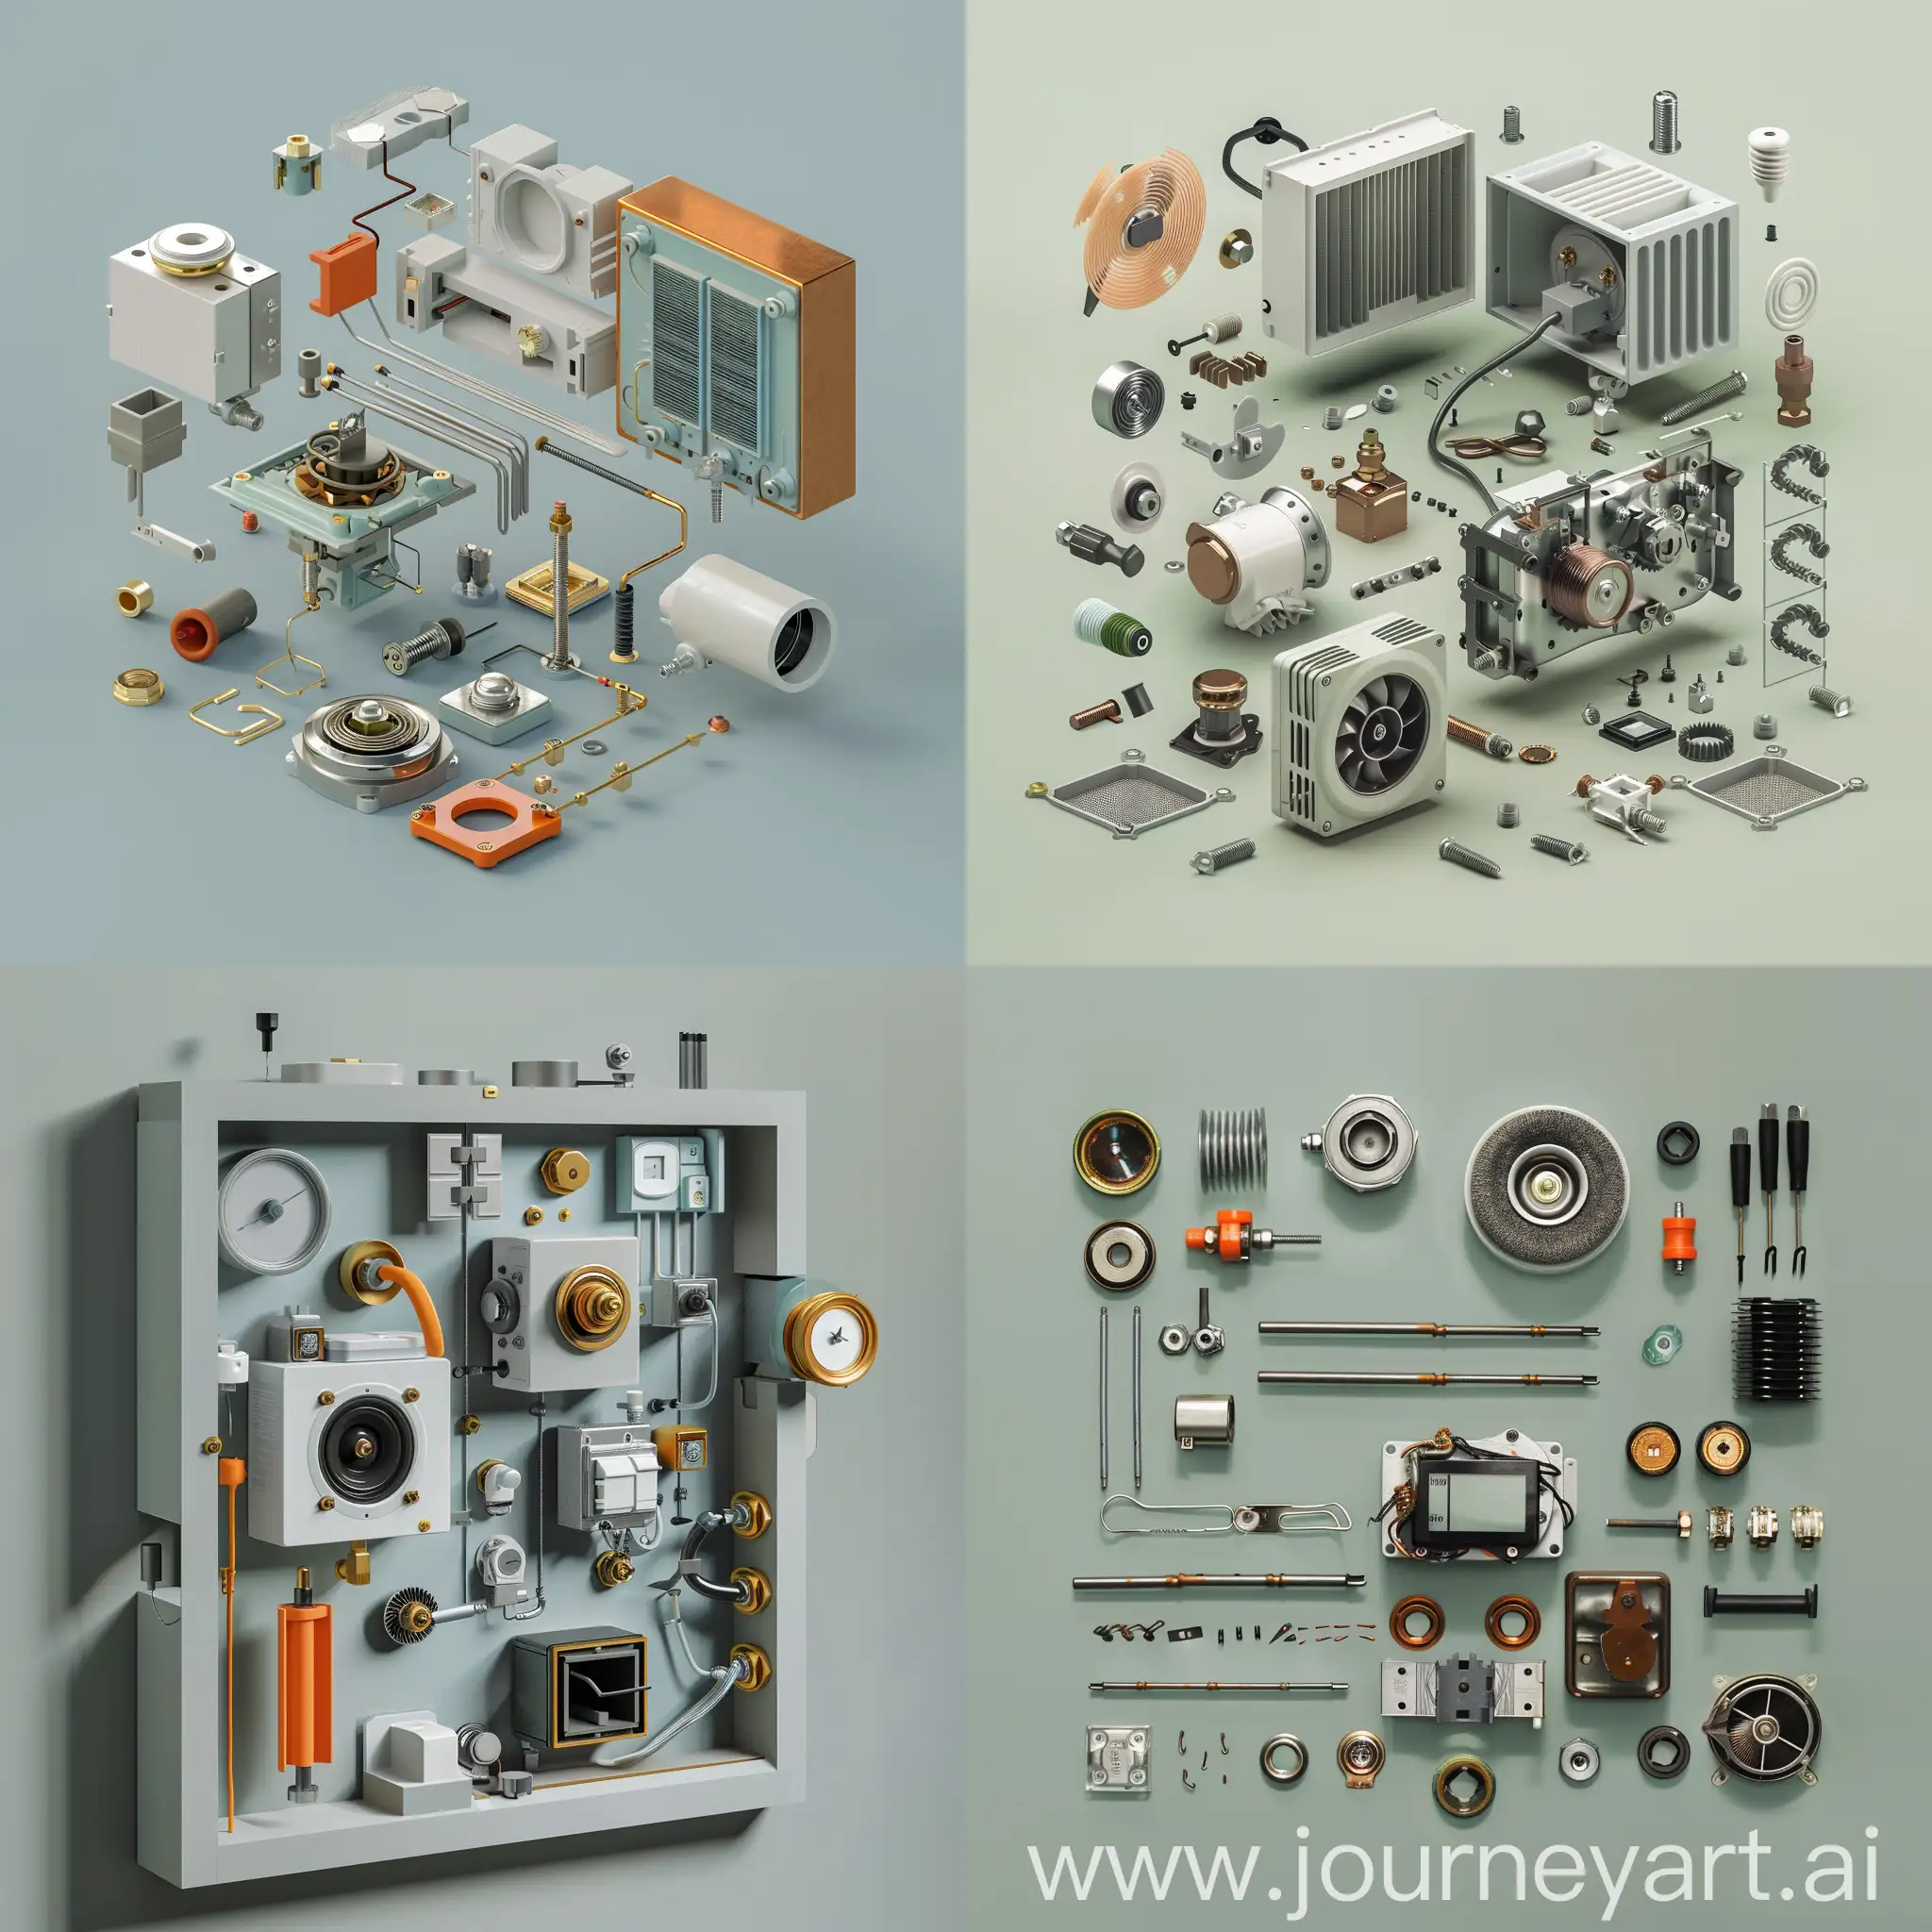 the thermostat disassembled for spare parts hangs in the photo space in isometry